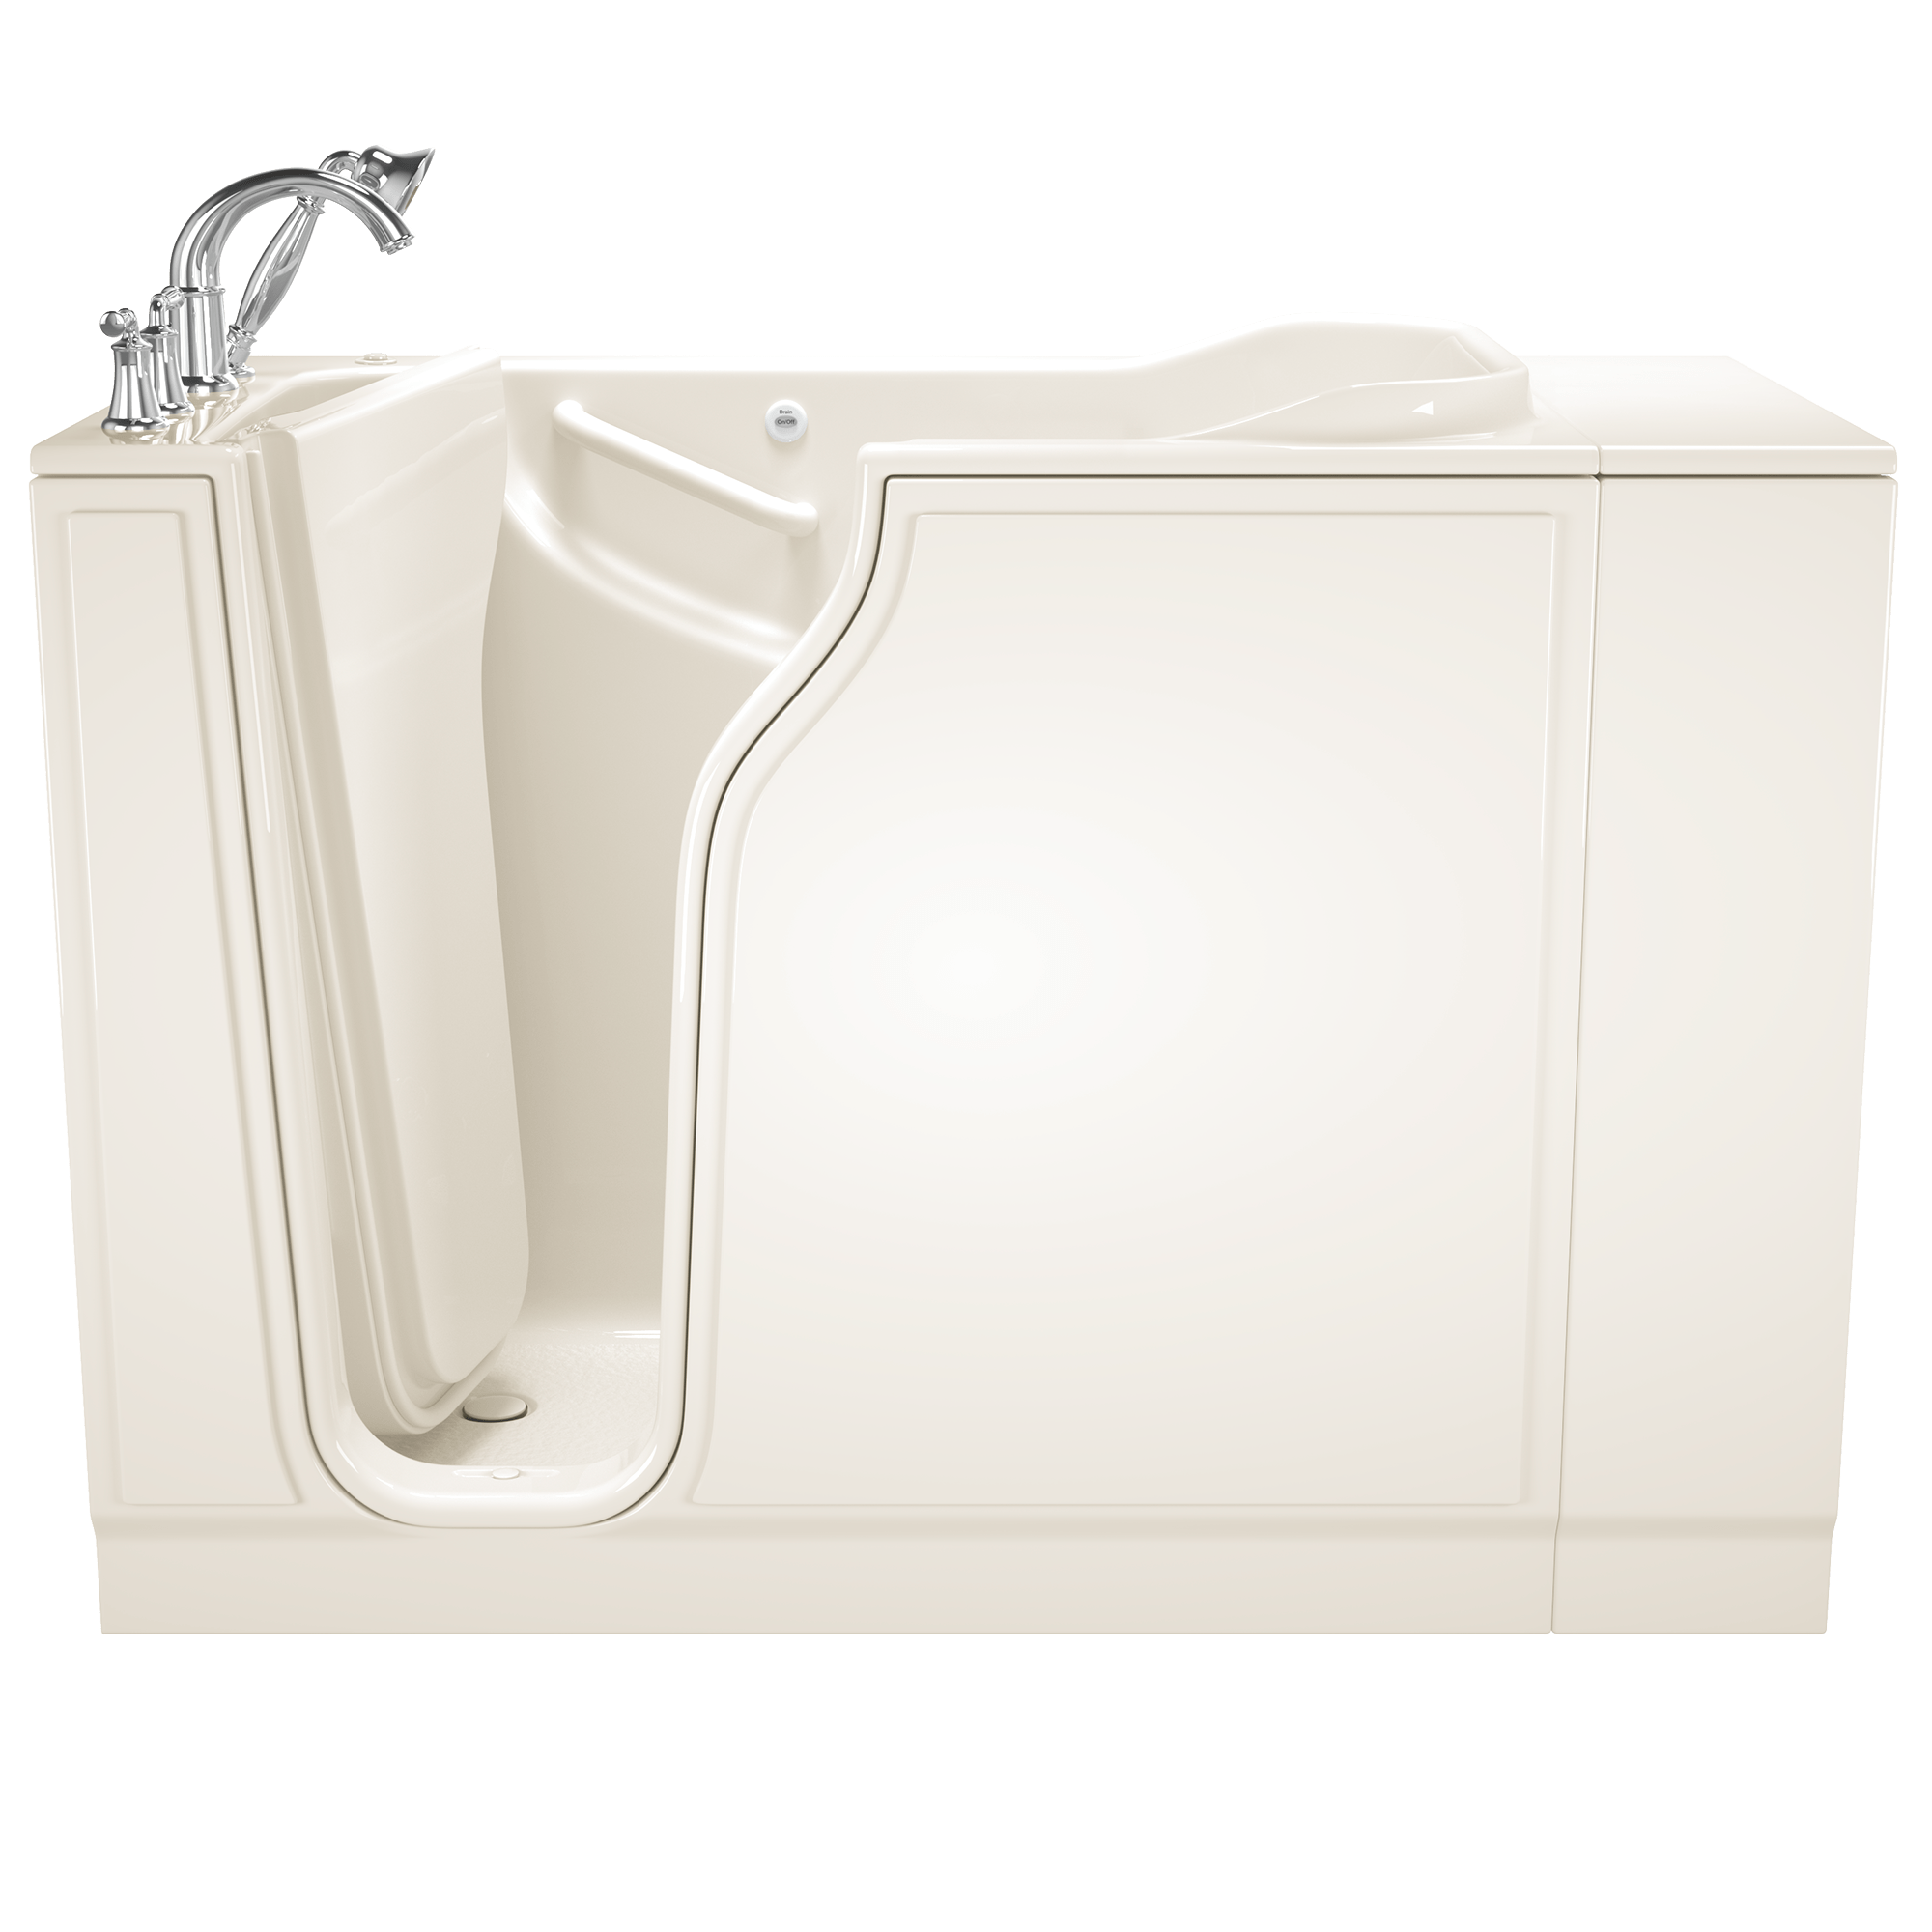 Gelcoat Value Series 30 x 52  Inch Walk in Tub With Air Spa System   Left Hand Drain With Faucet WIB LINEN